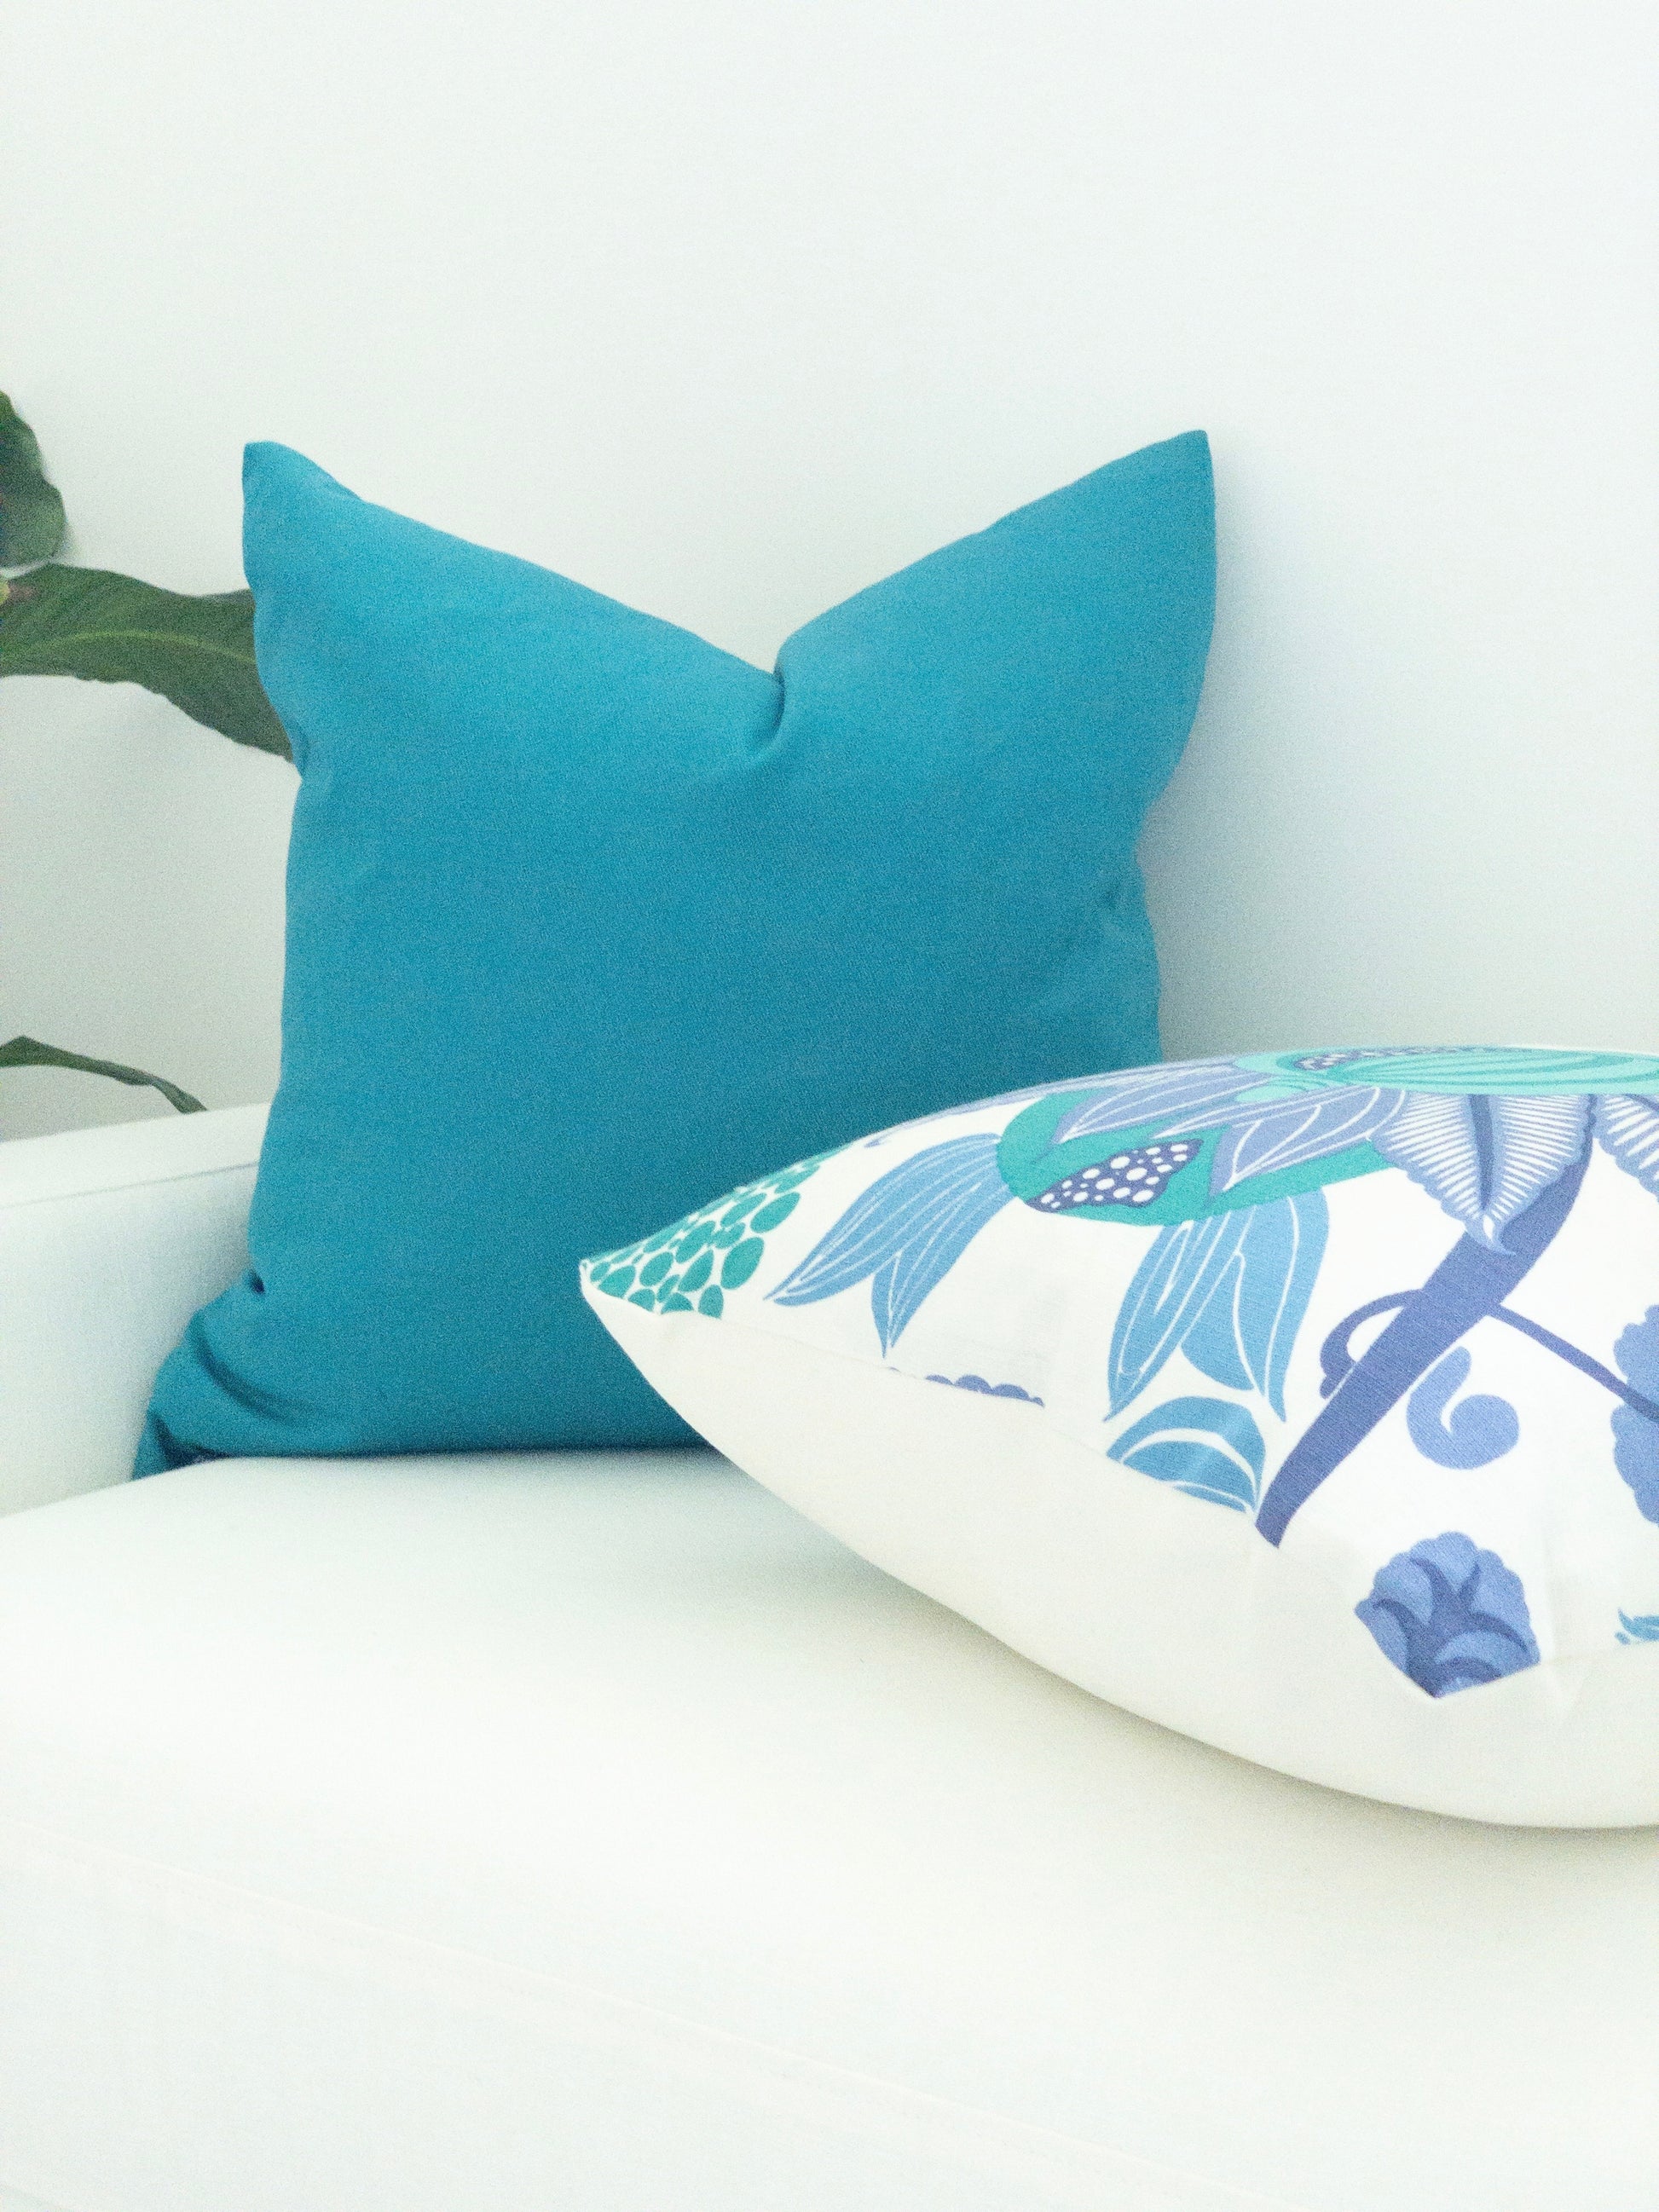 Peacock blue solid pillow with printed coordinating decorative pillow